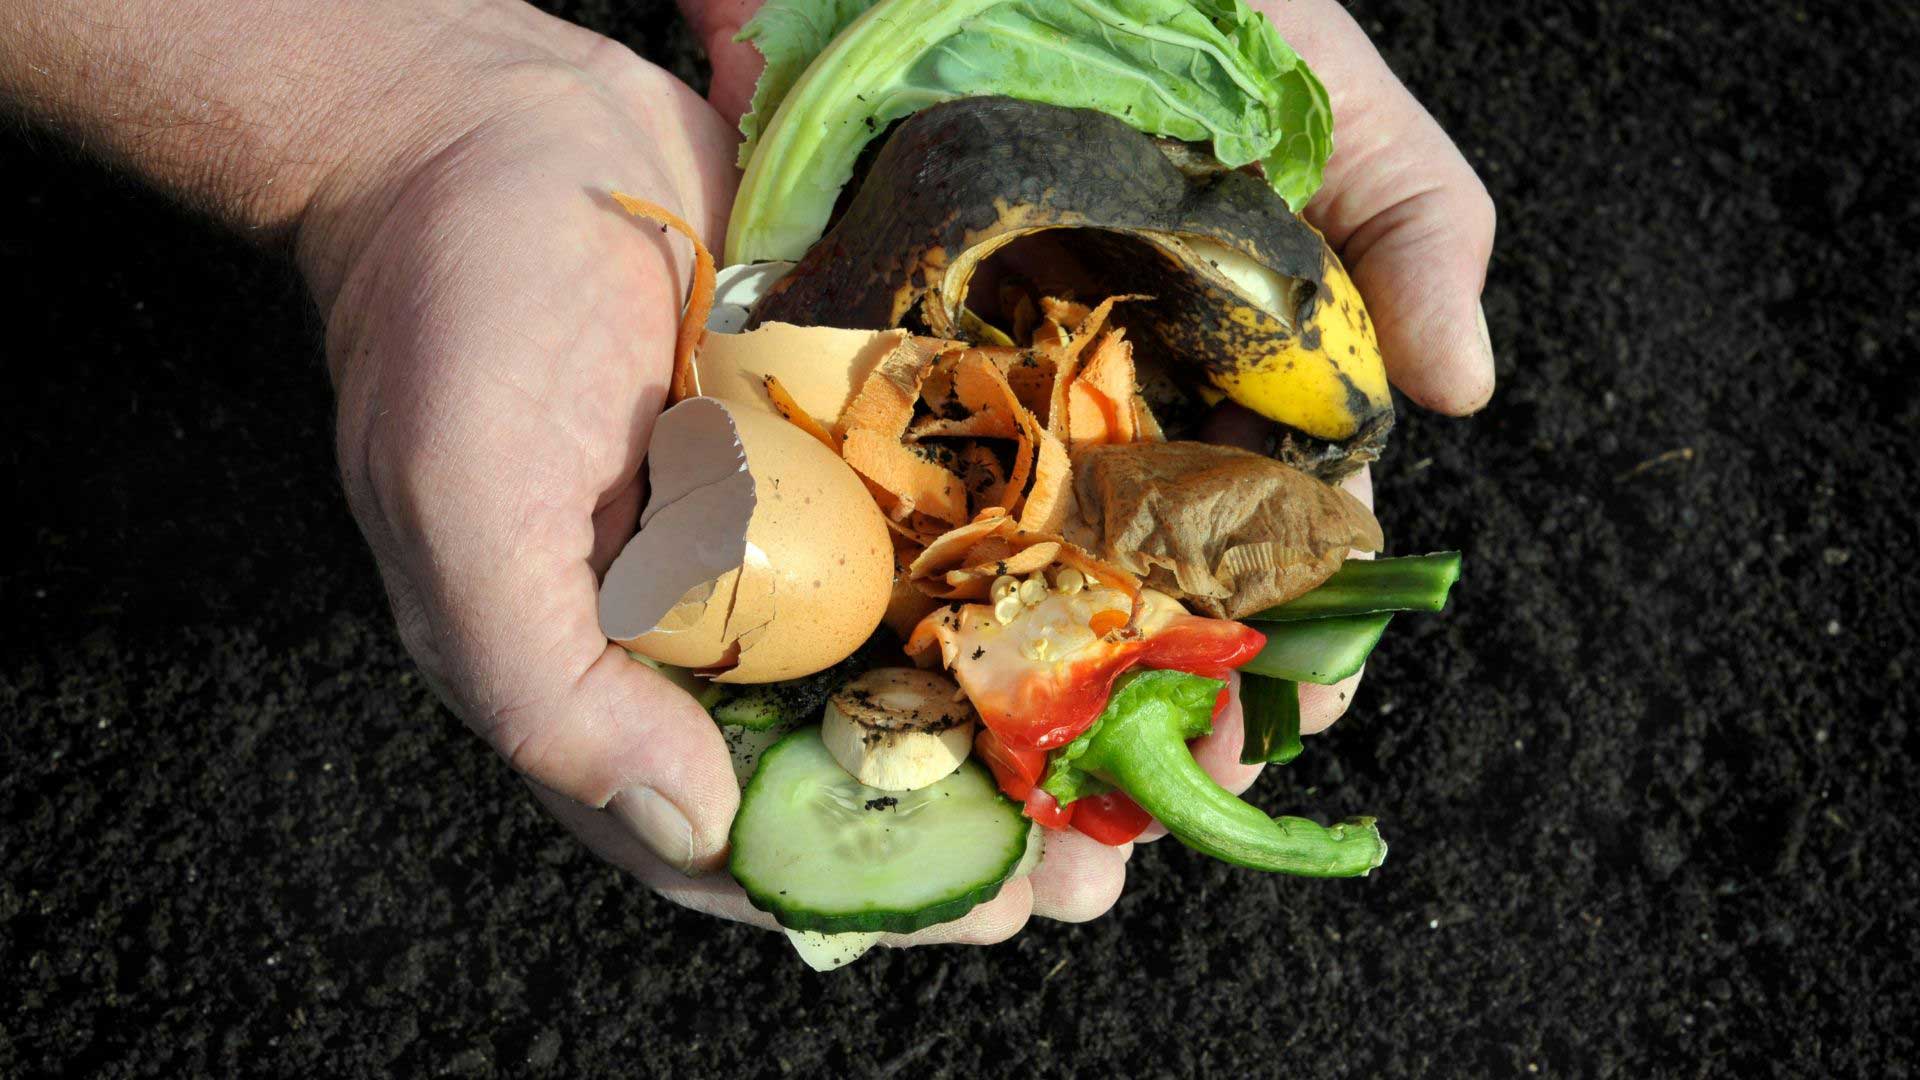 compost can harbour harmful bacteria for chickens